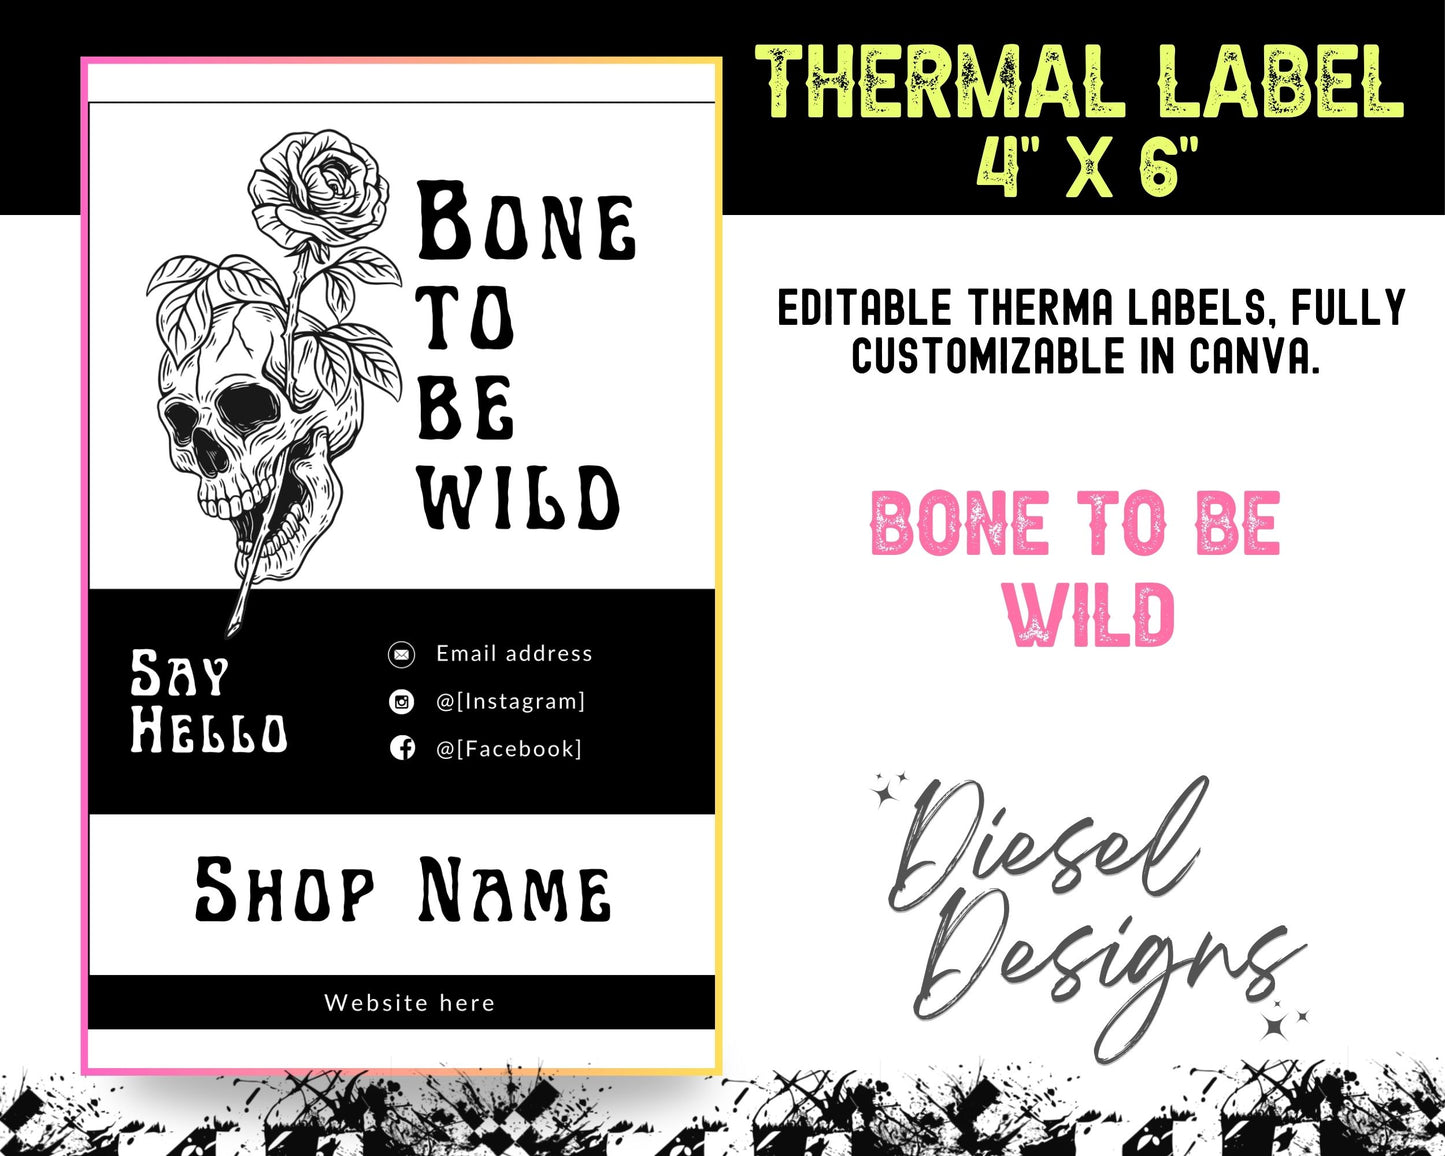 Bone to Be Wild Thermal (4x6) | Thermal Label | Edit in Canva | 4" x 6" | Package Label